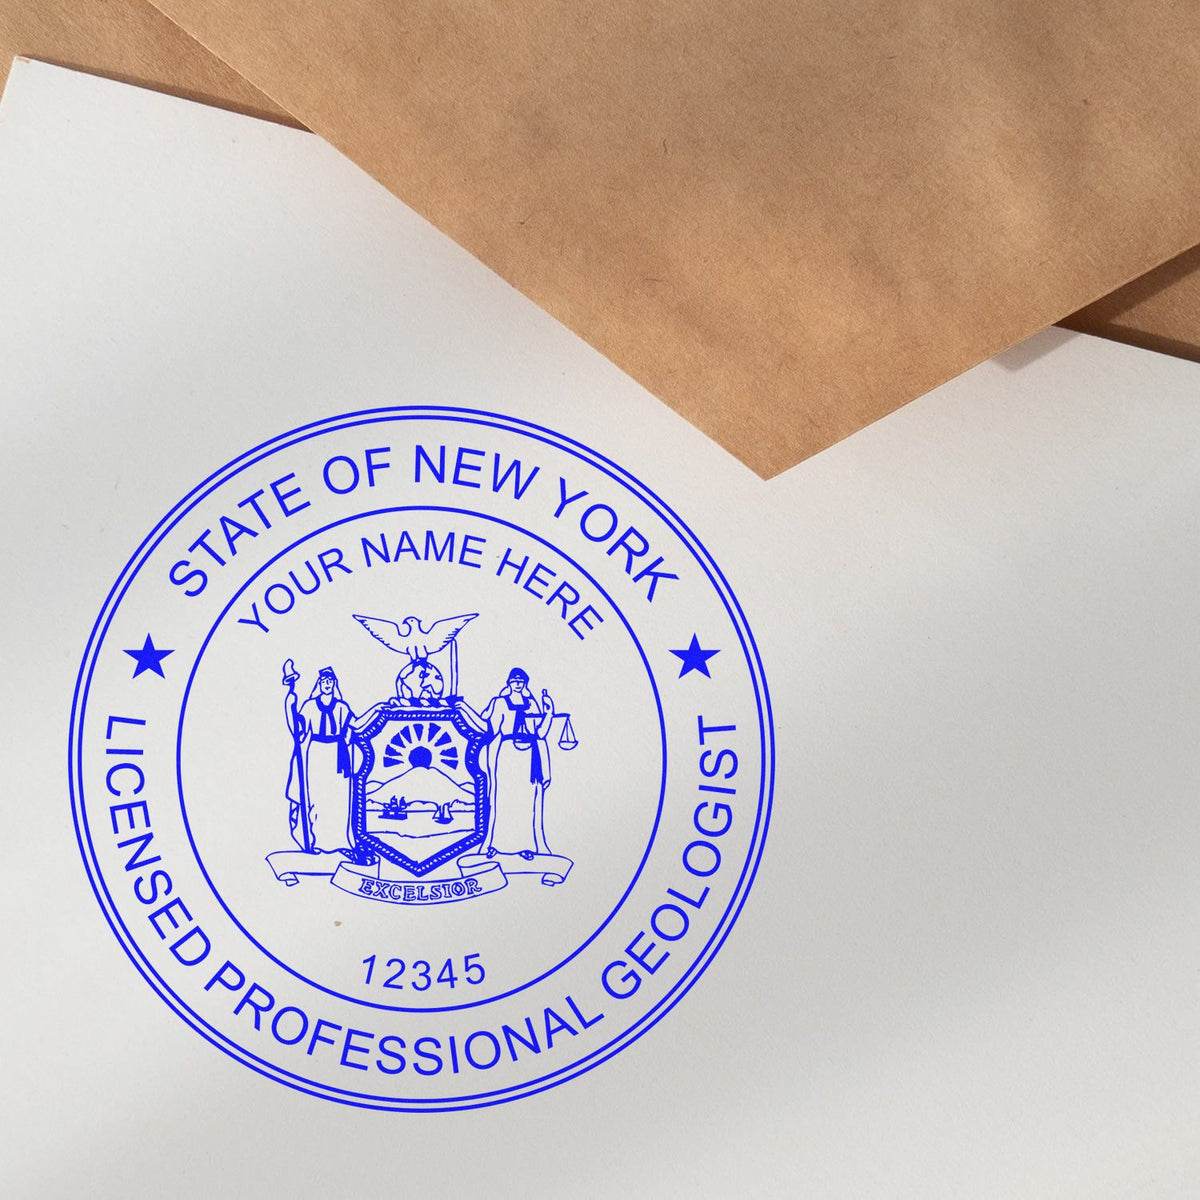 An alternative view of the Digital New York Geologist Stamp, Electronic Seal for New York Geologist stamped on a sheet of paper showing the image in use